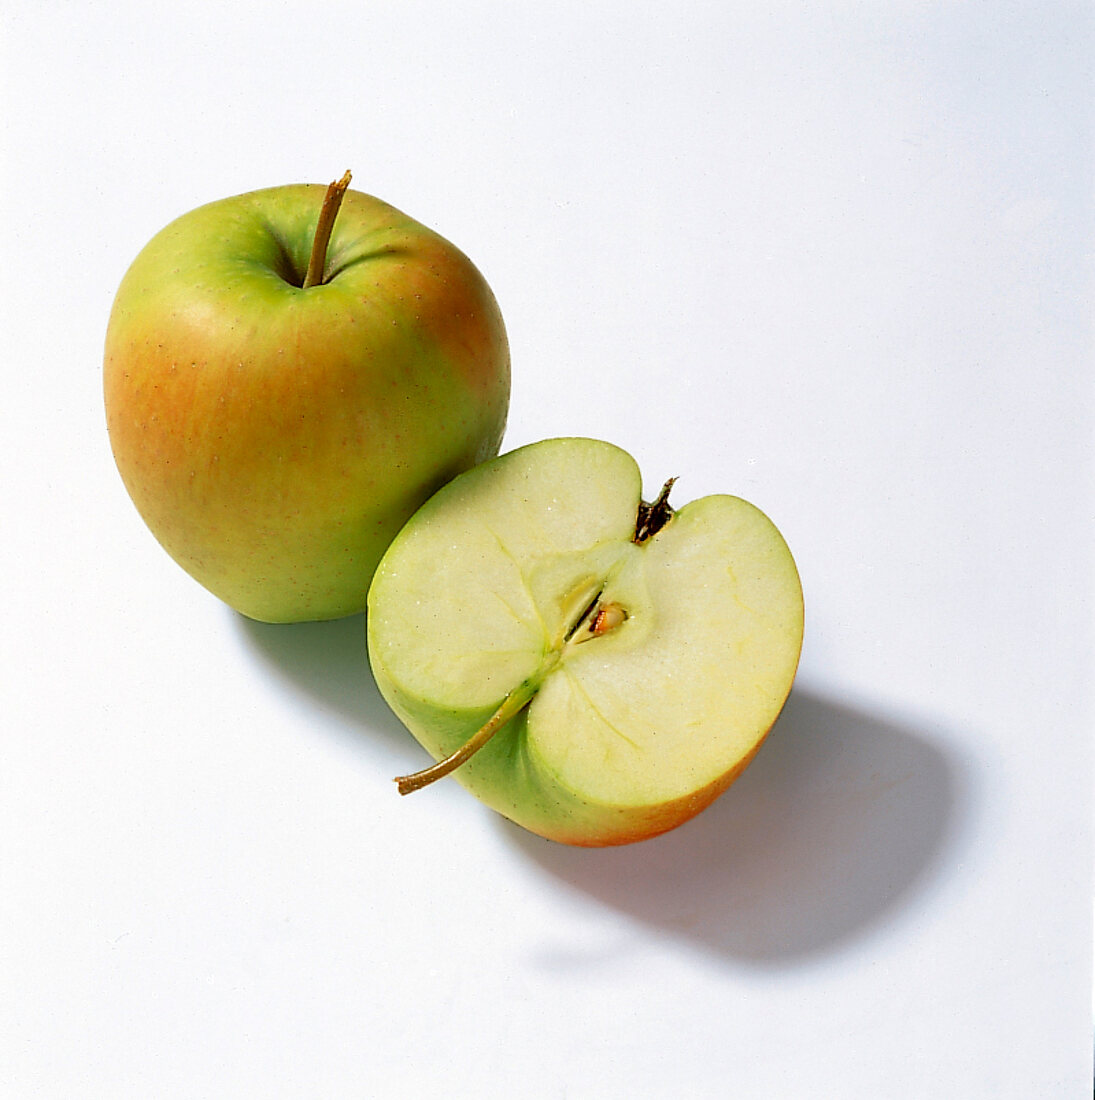 Whole and halved apples on white background